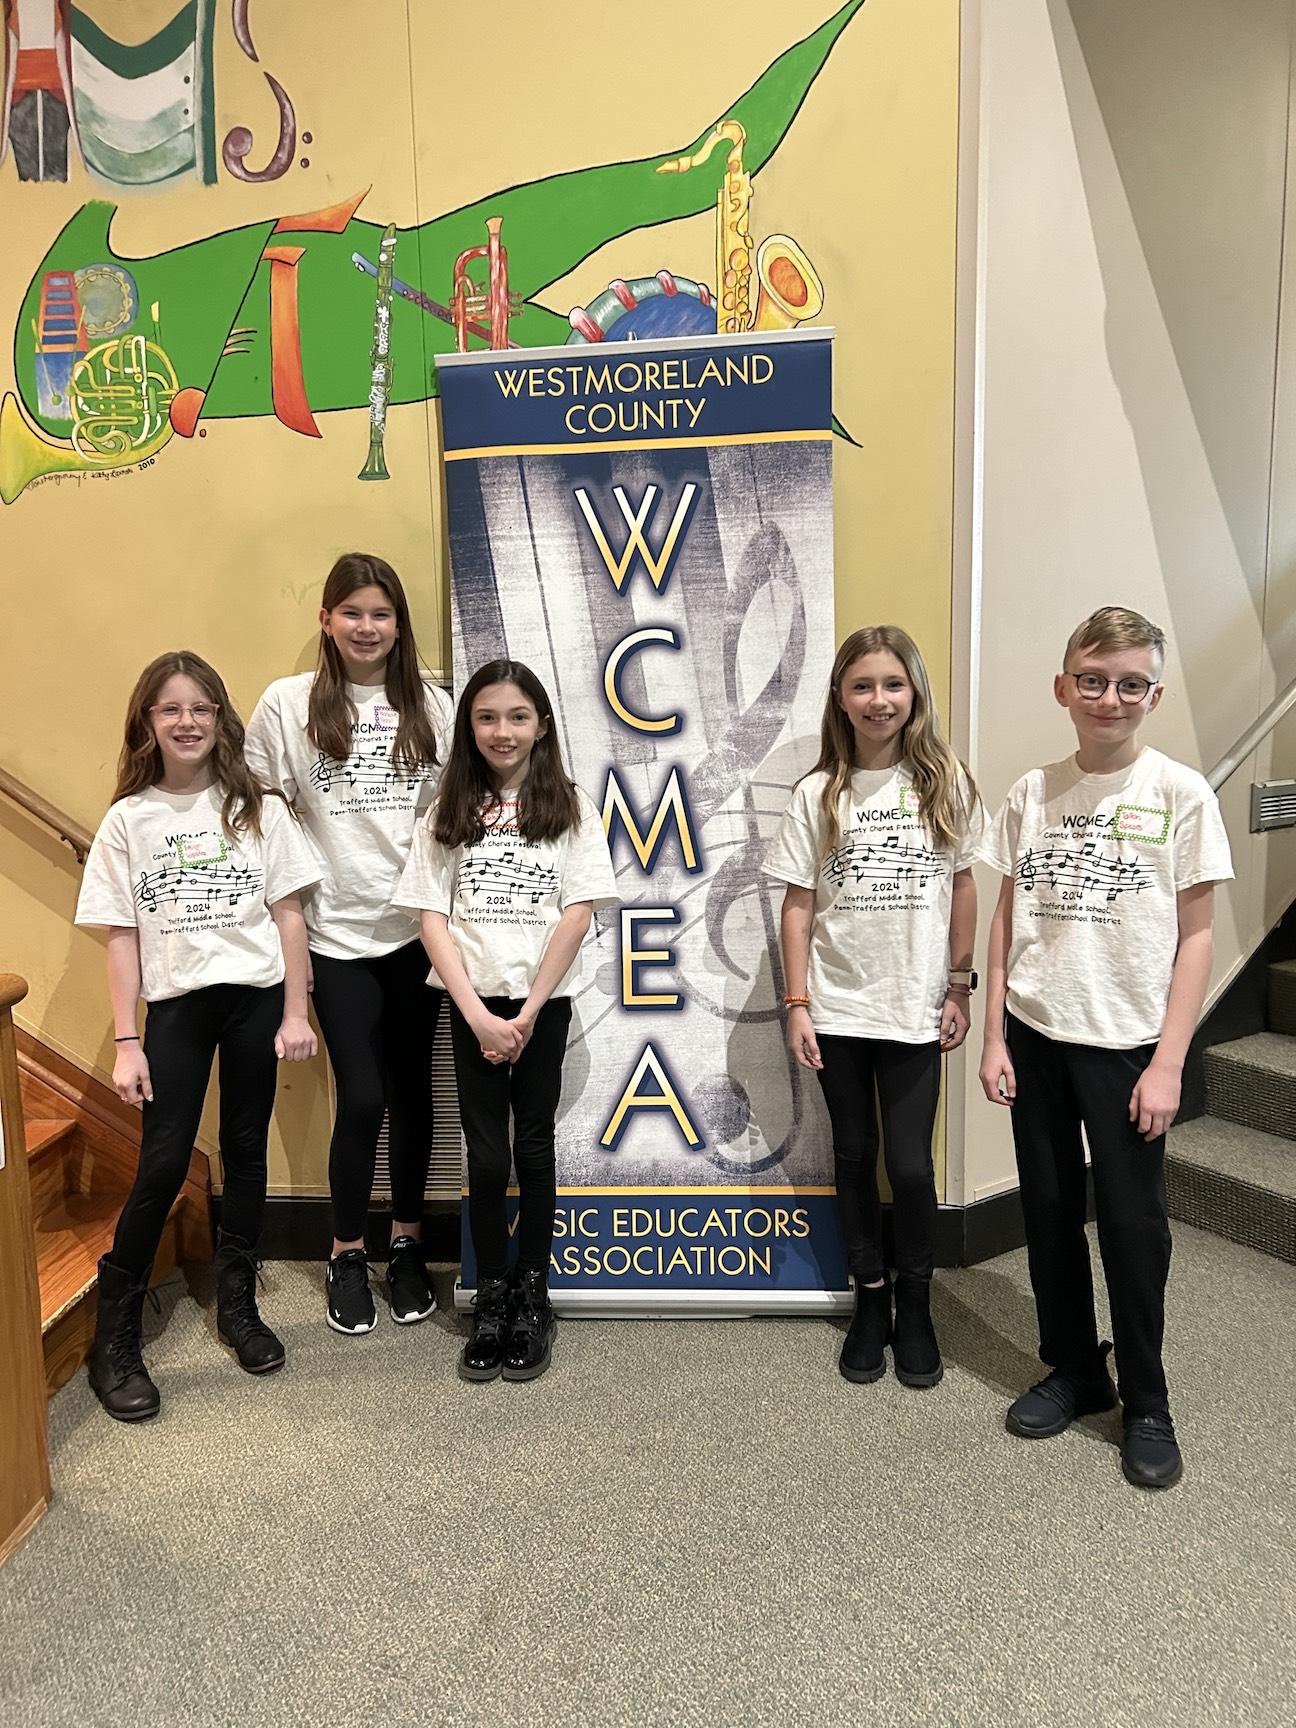 Some of Penn-Trafford’s participants at the WCMEA County Chorus were (left to right) Evelyn Terpstra, Natalie Good, Aubrey Nelson, Hope Tullis, and Tallon Spears